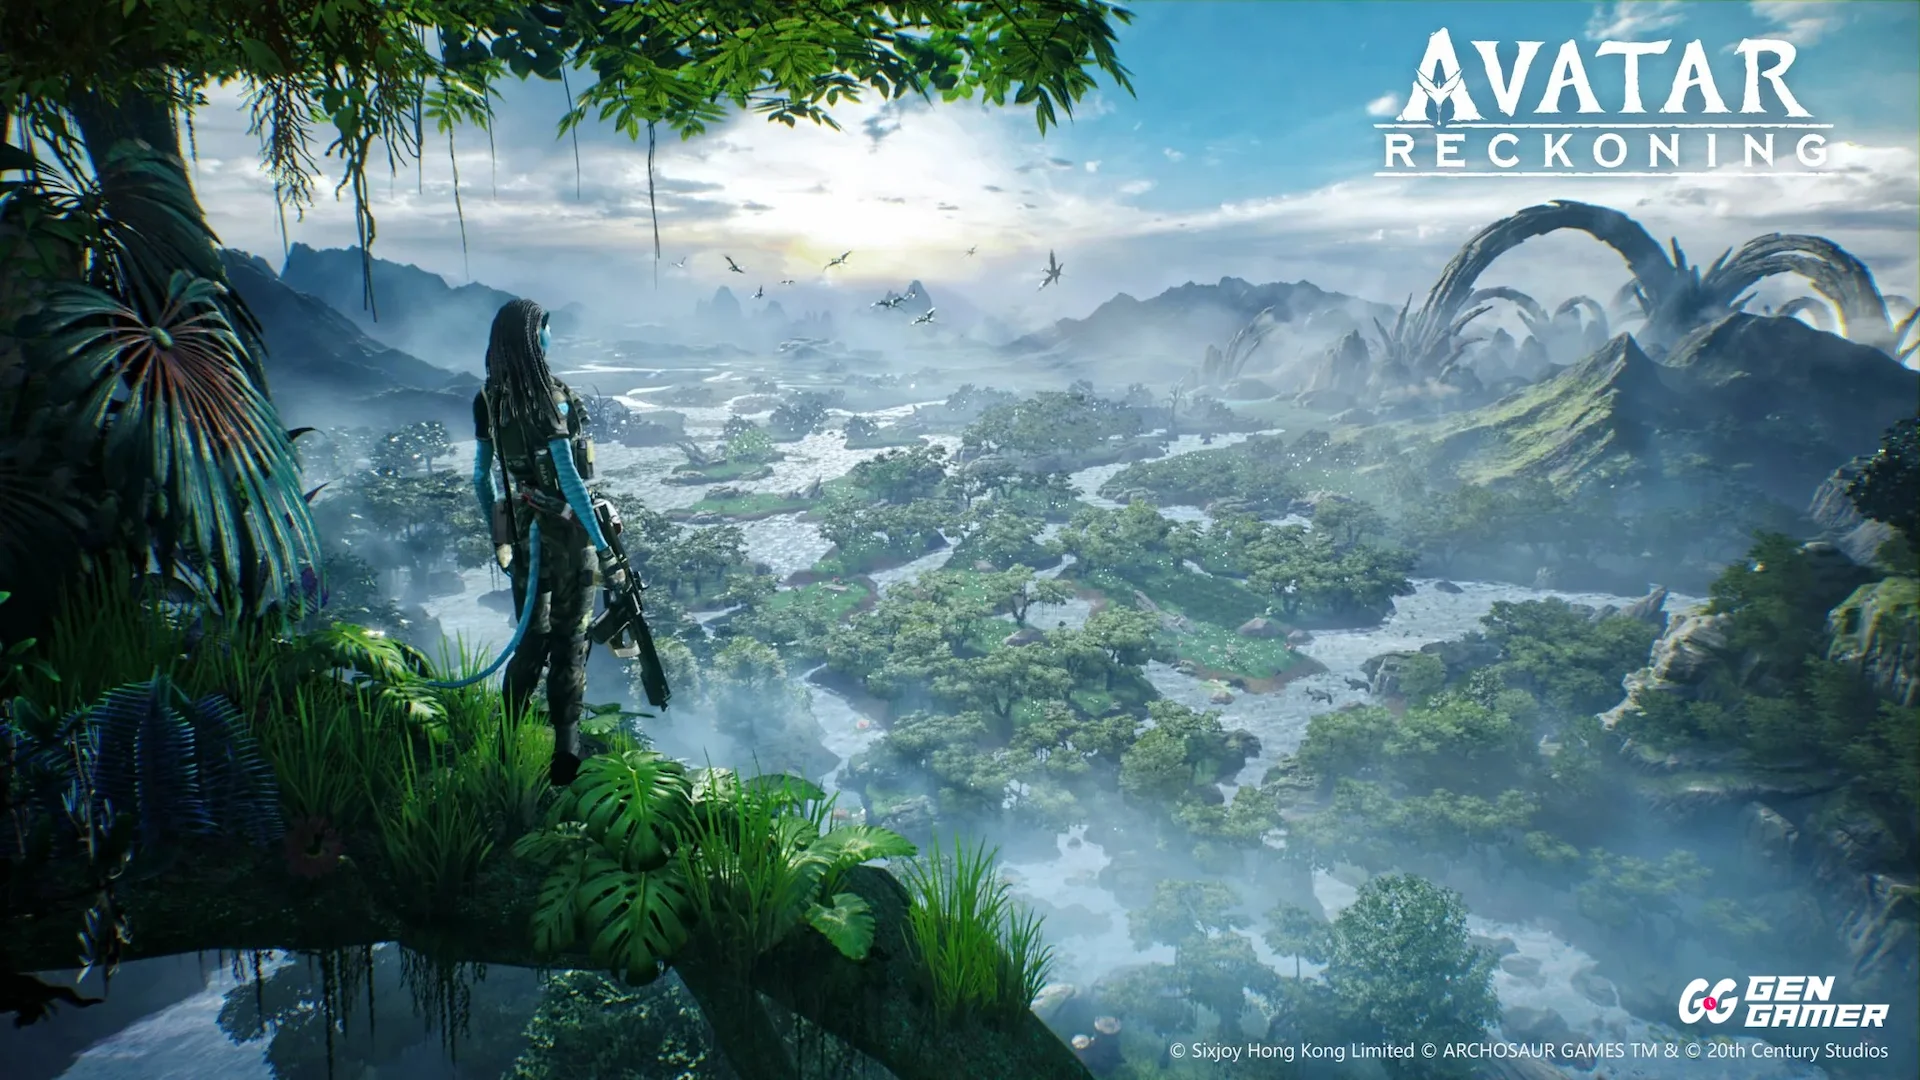 Avatar Reckoning Test on Android to Start Soon